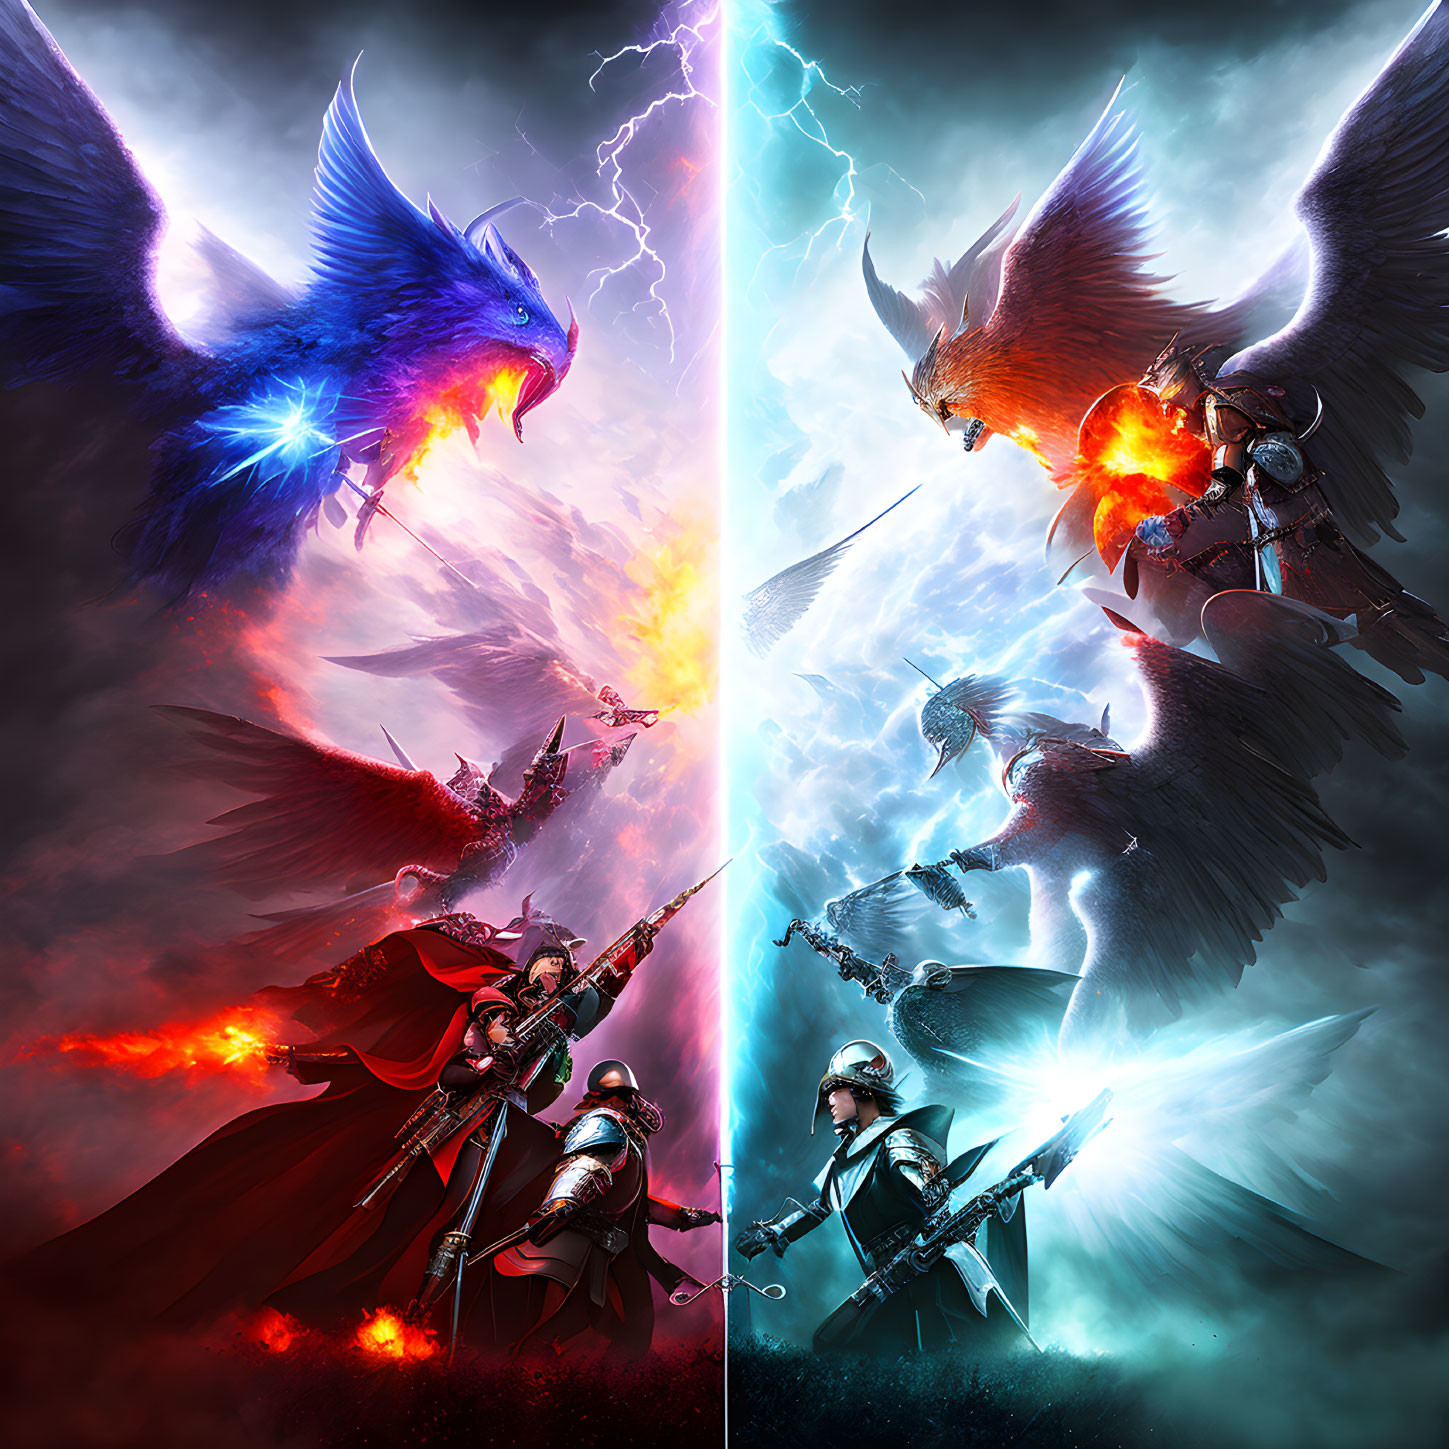 Dynamic digital artwork: Fiery red warriors and dragon face off against icy blue figures in symmetrical confrontation